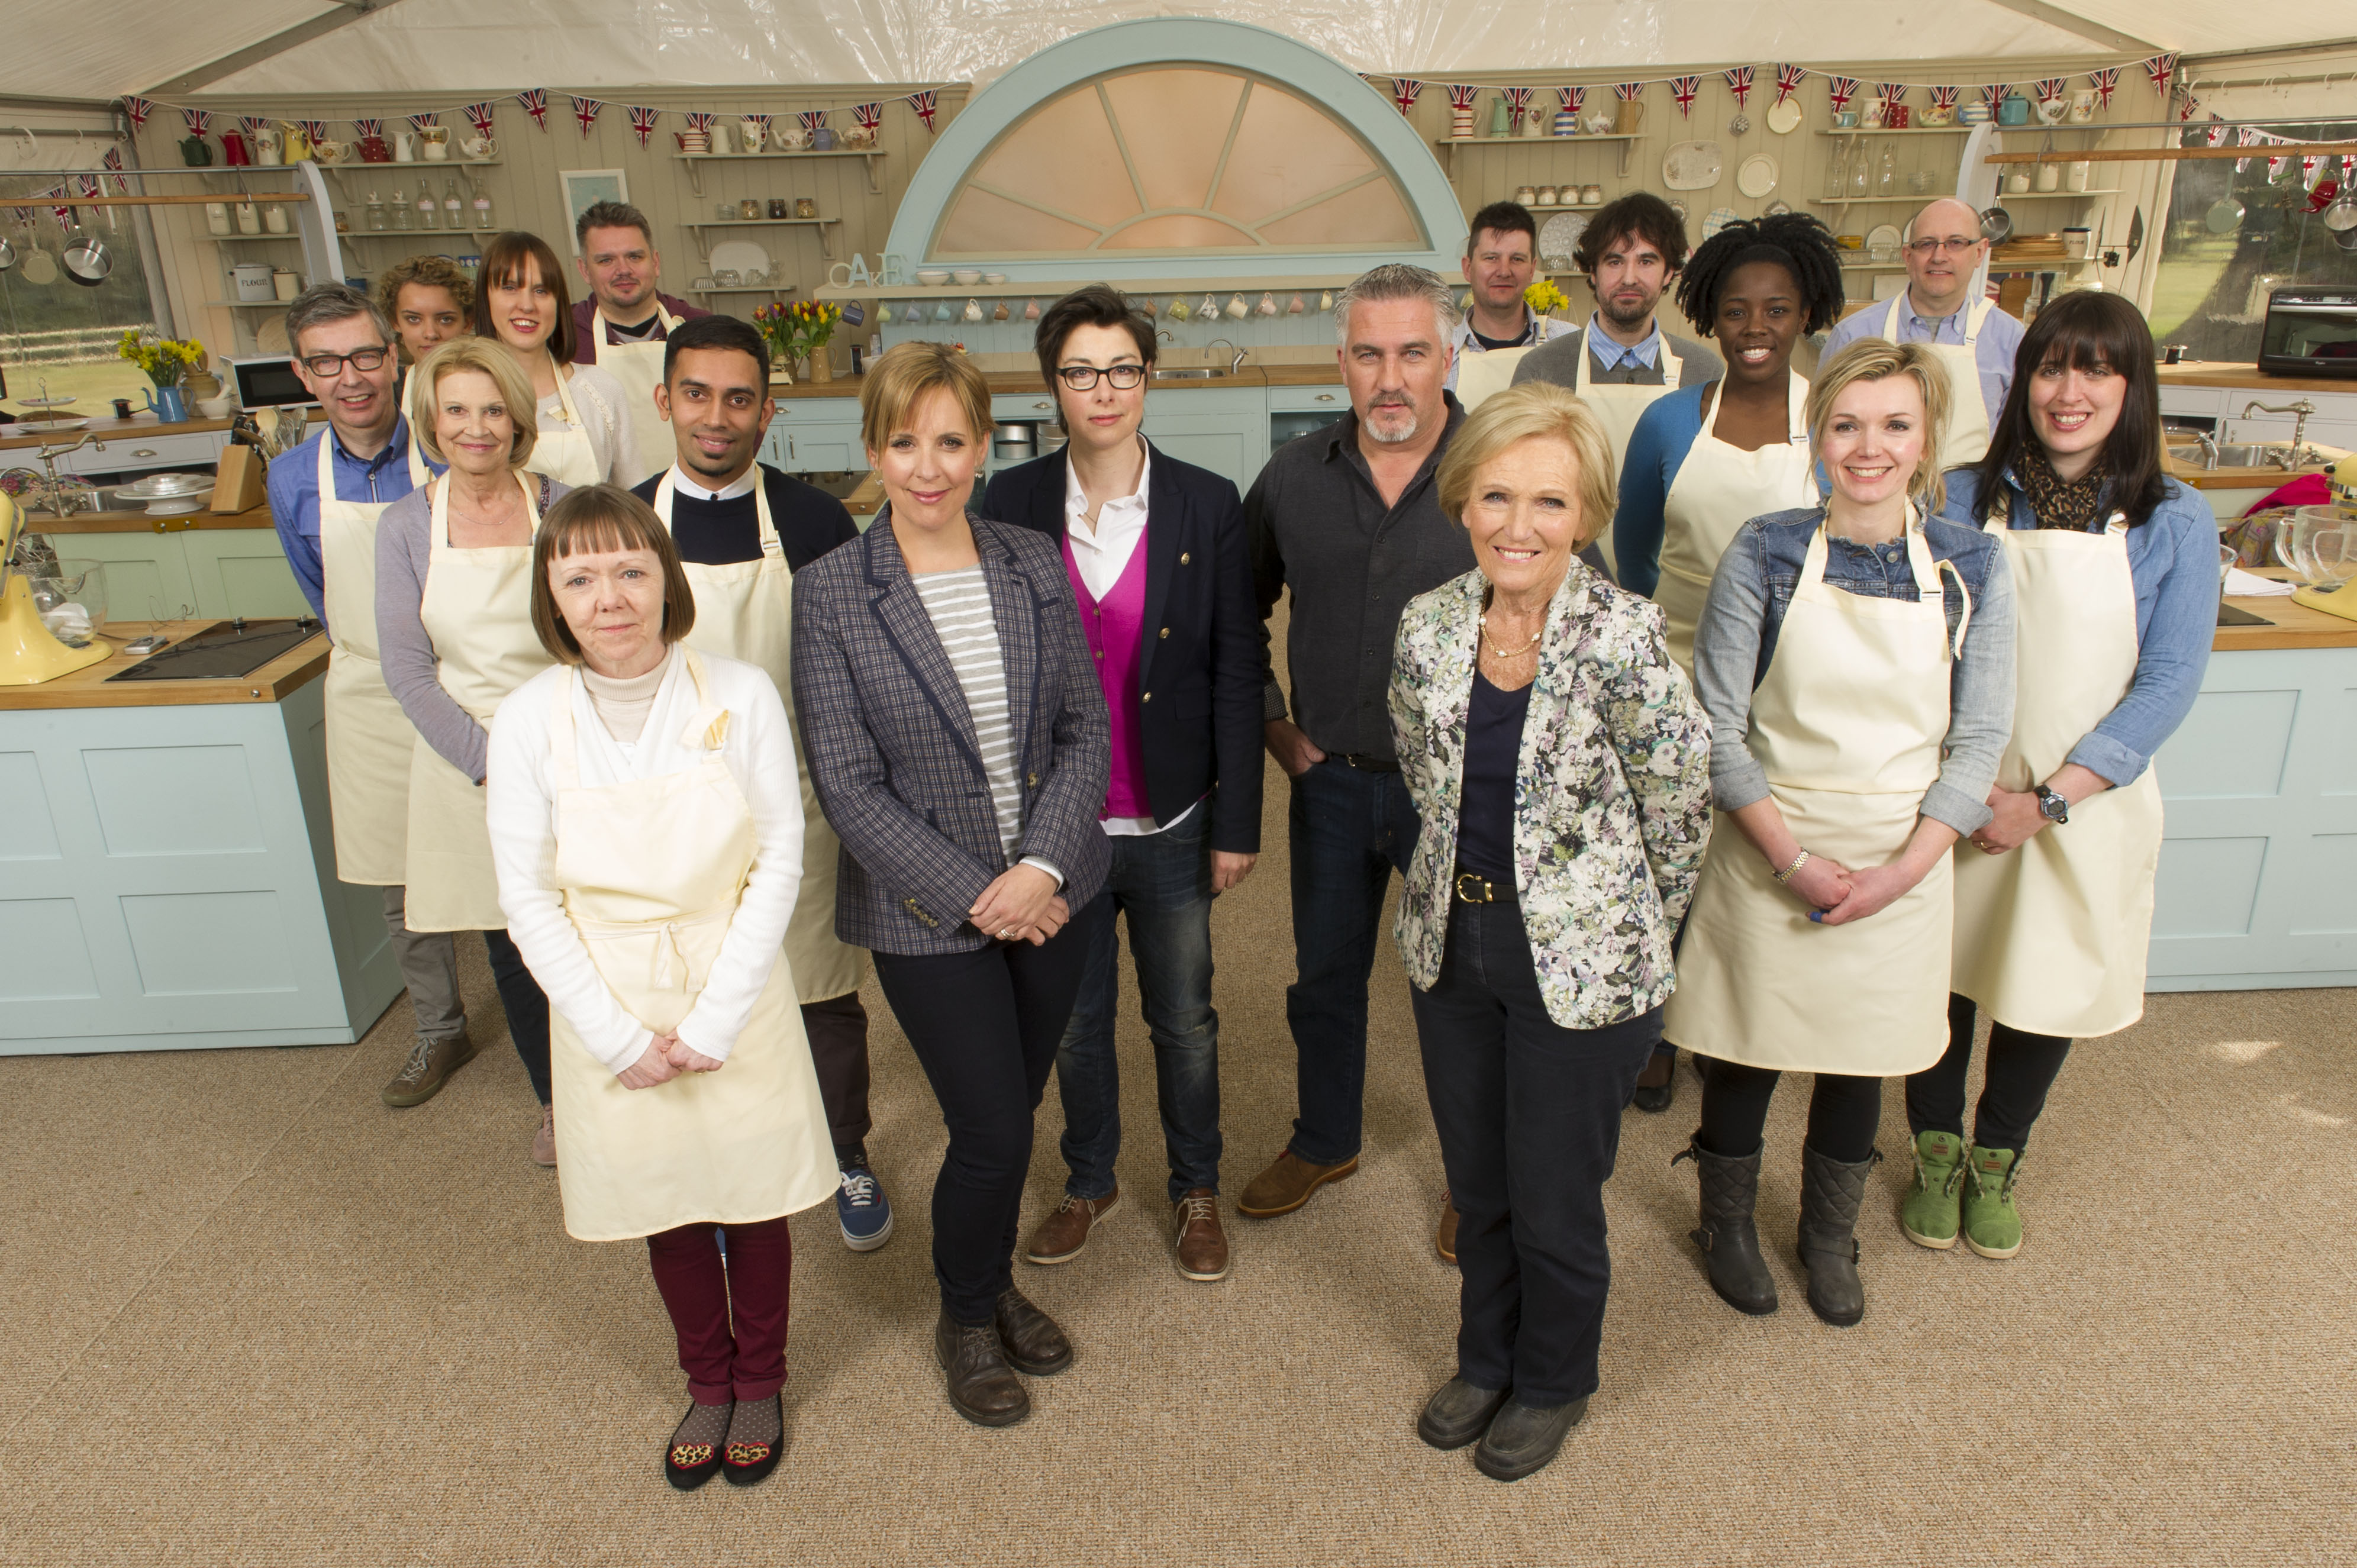 'The Great British Baking Show' Returns to PBS This Fall! Telly Visions